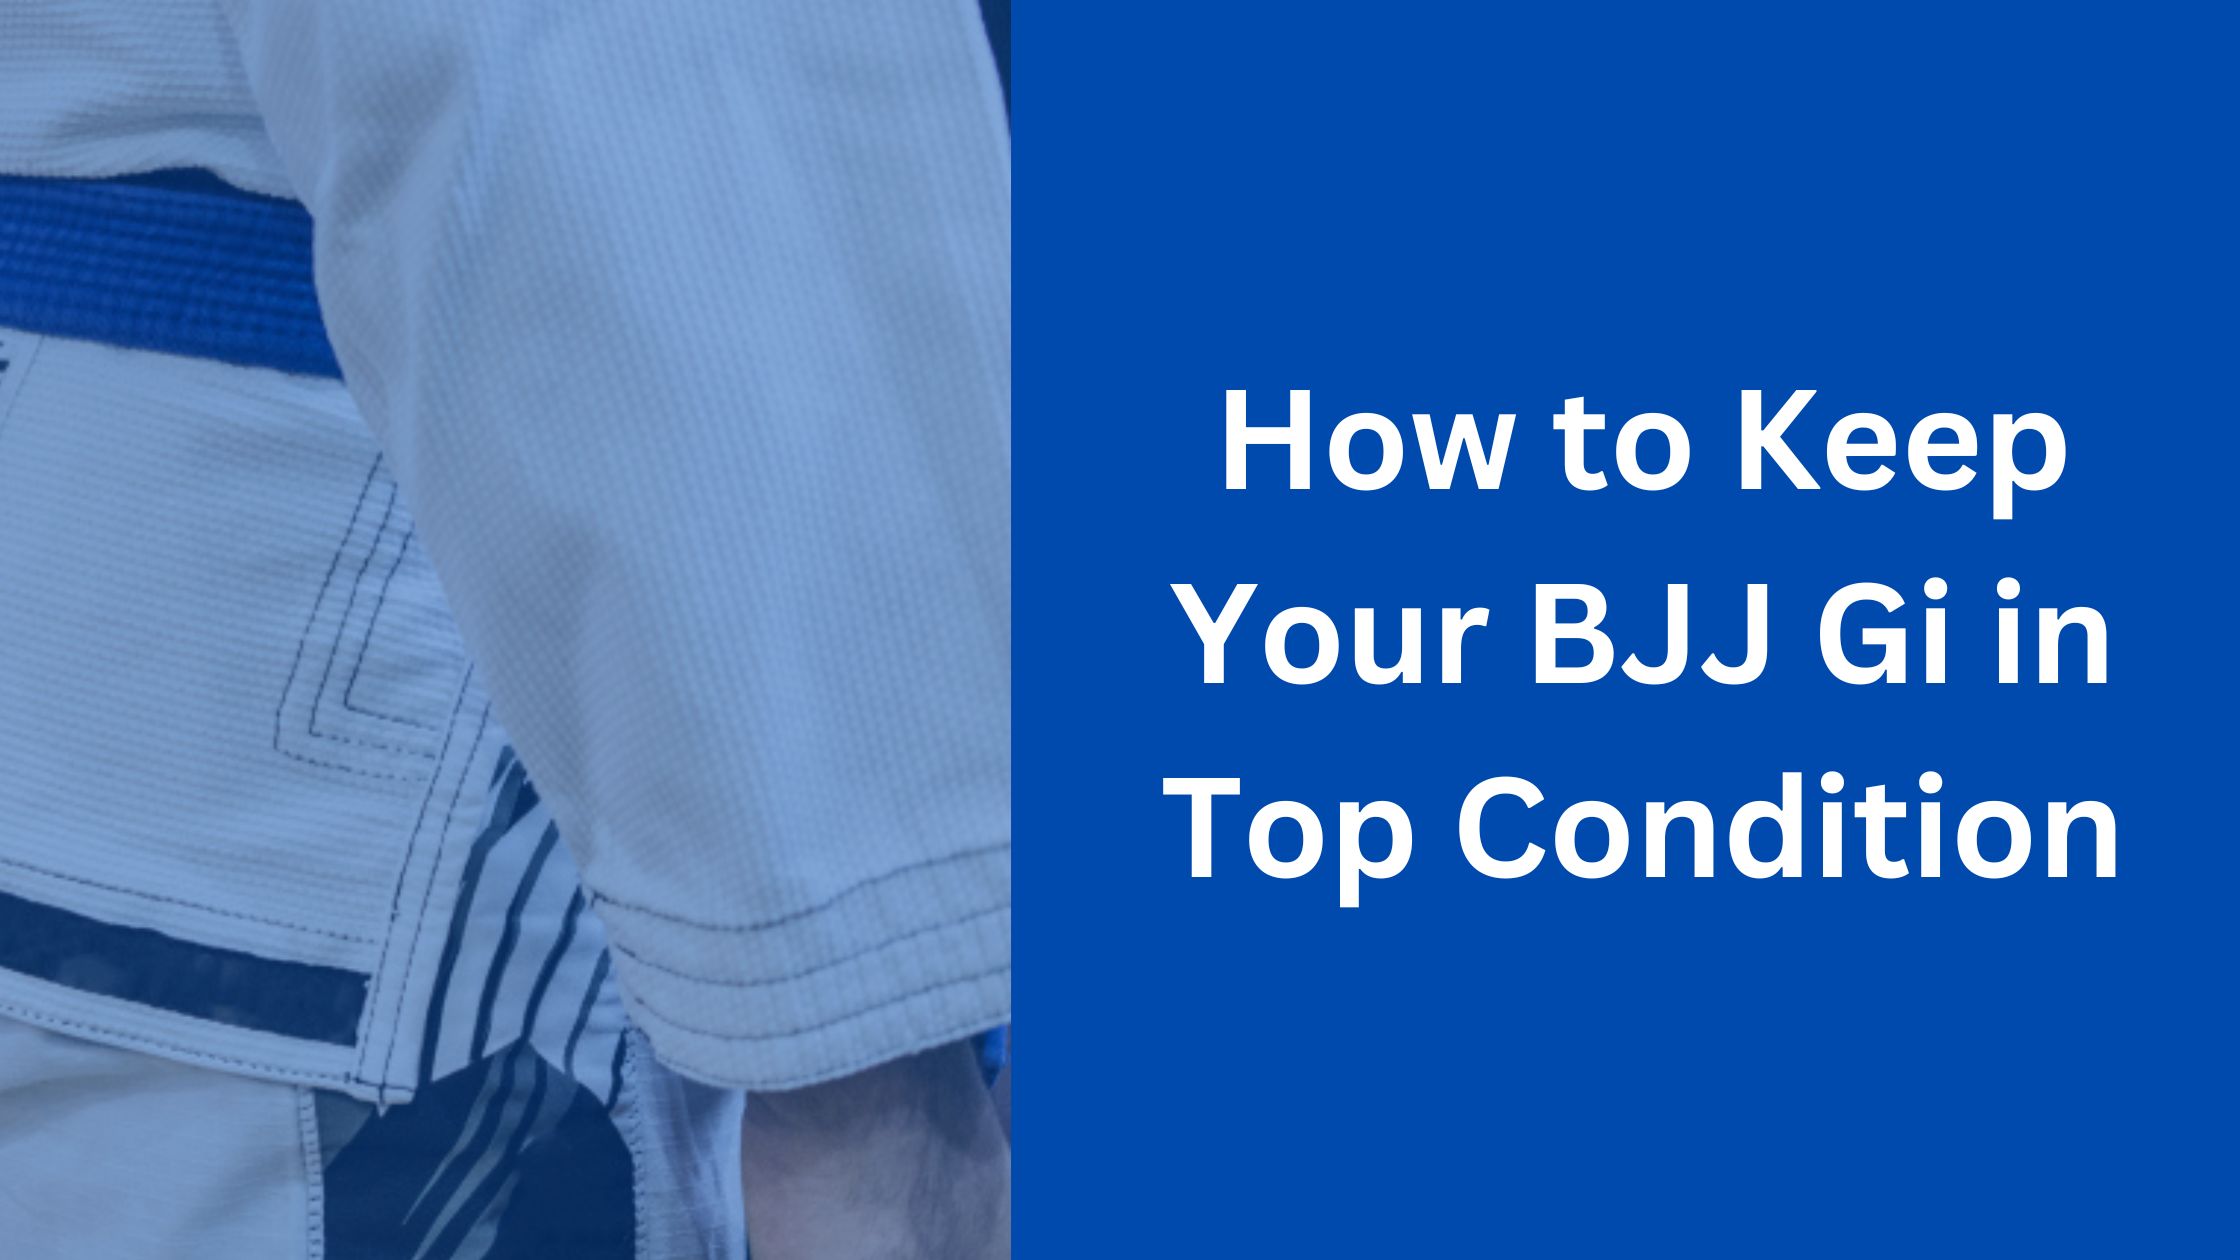 How to Keep Your BJJ Gi in Top Condition